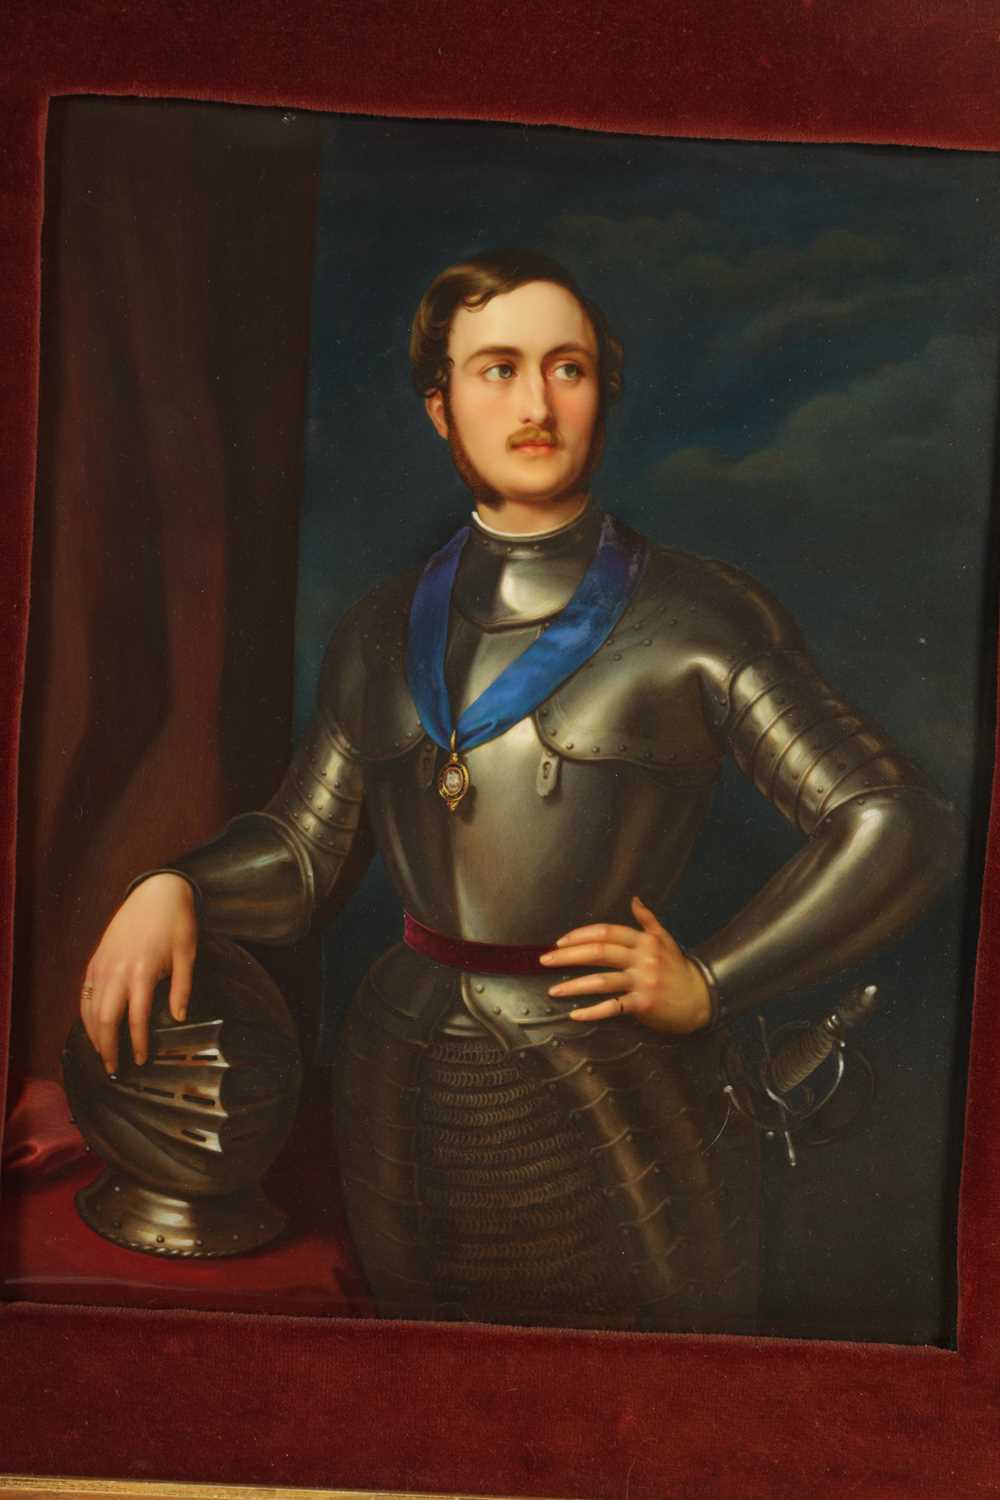 A LARGE 19TH CENTURY GERMAN PAINTED PORCELAIN PLAQUE OF PRINCE ALBERT - Image 2 of 6